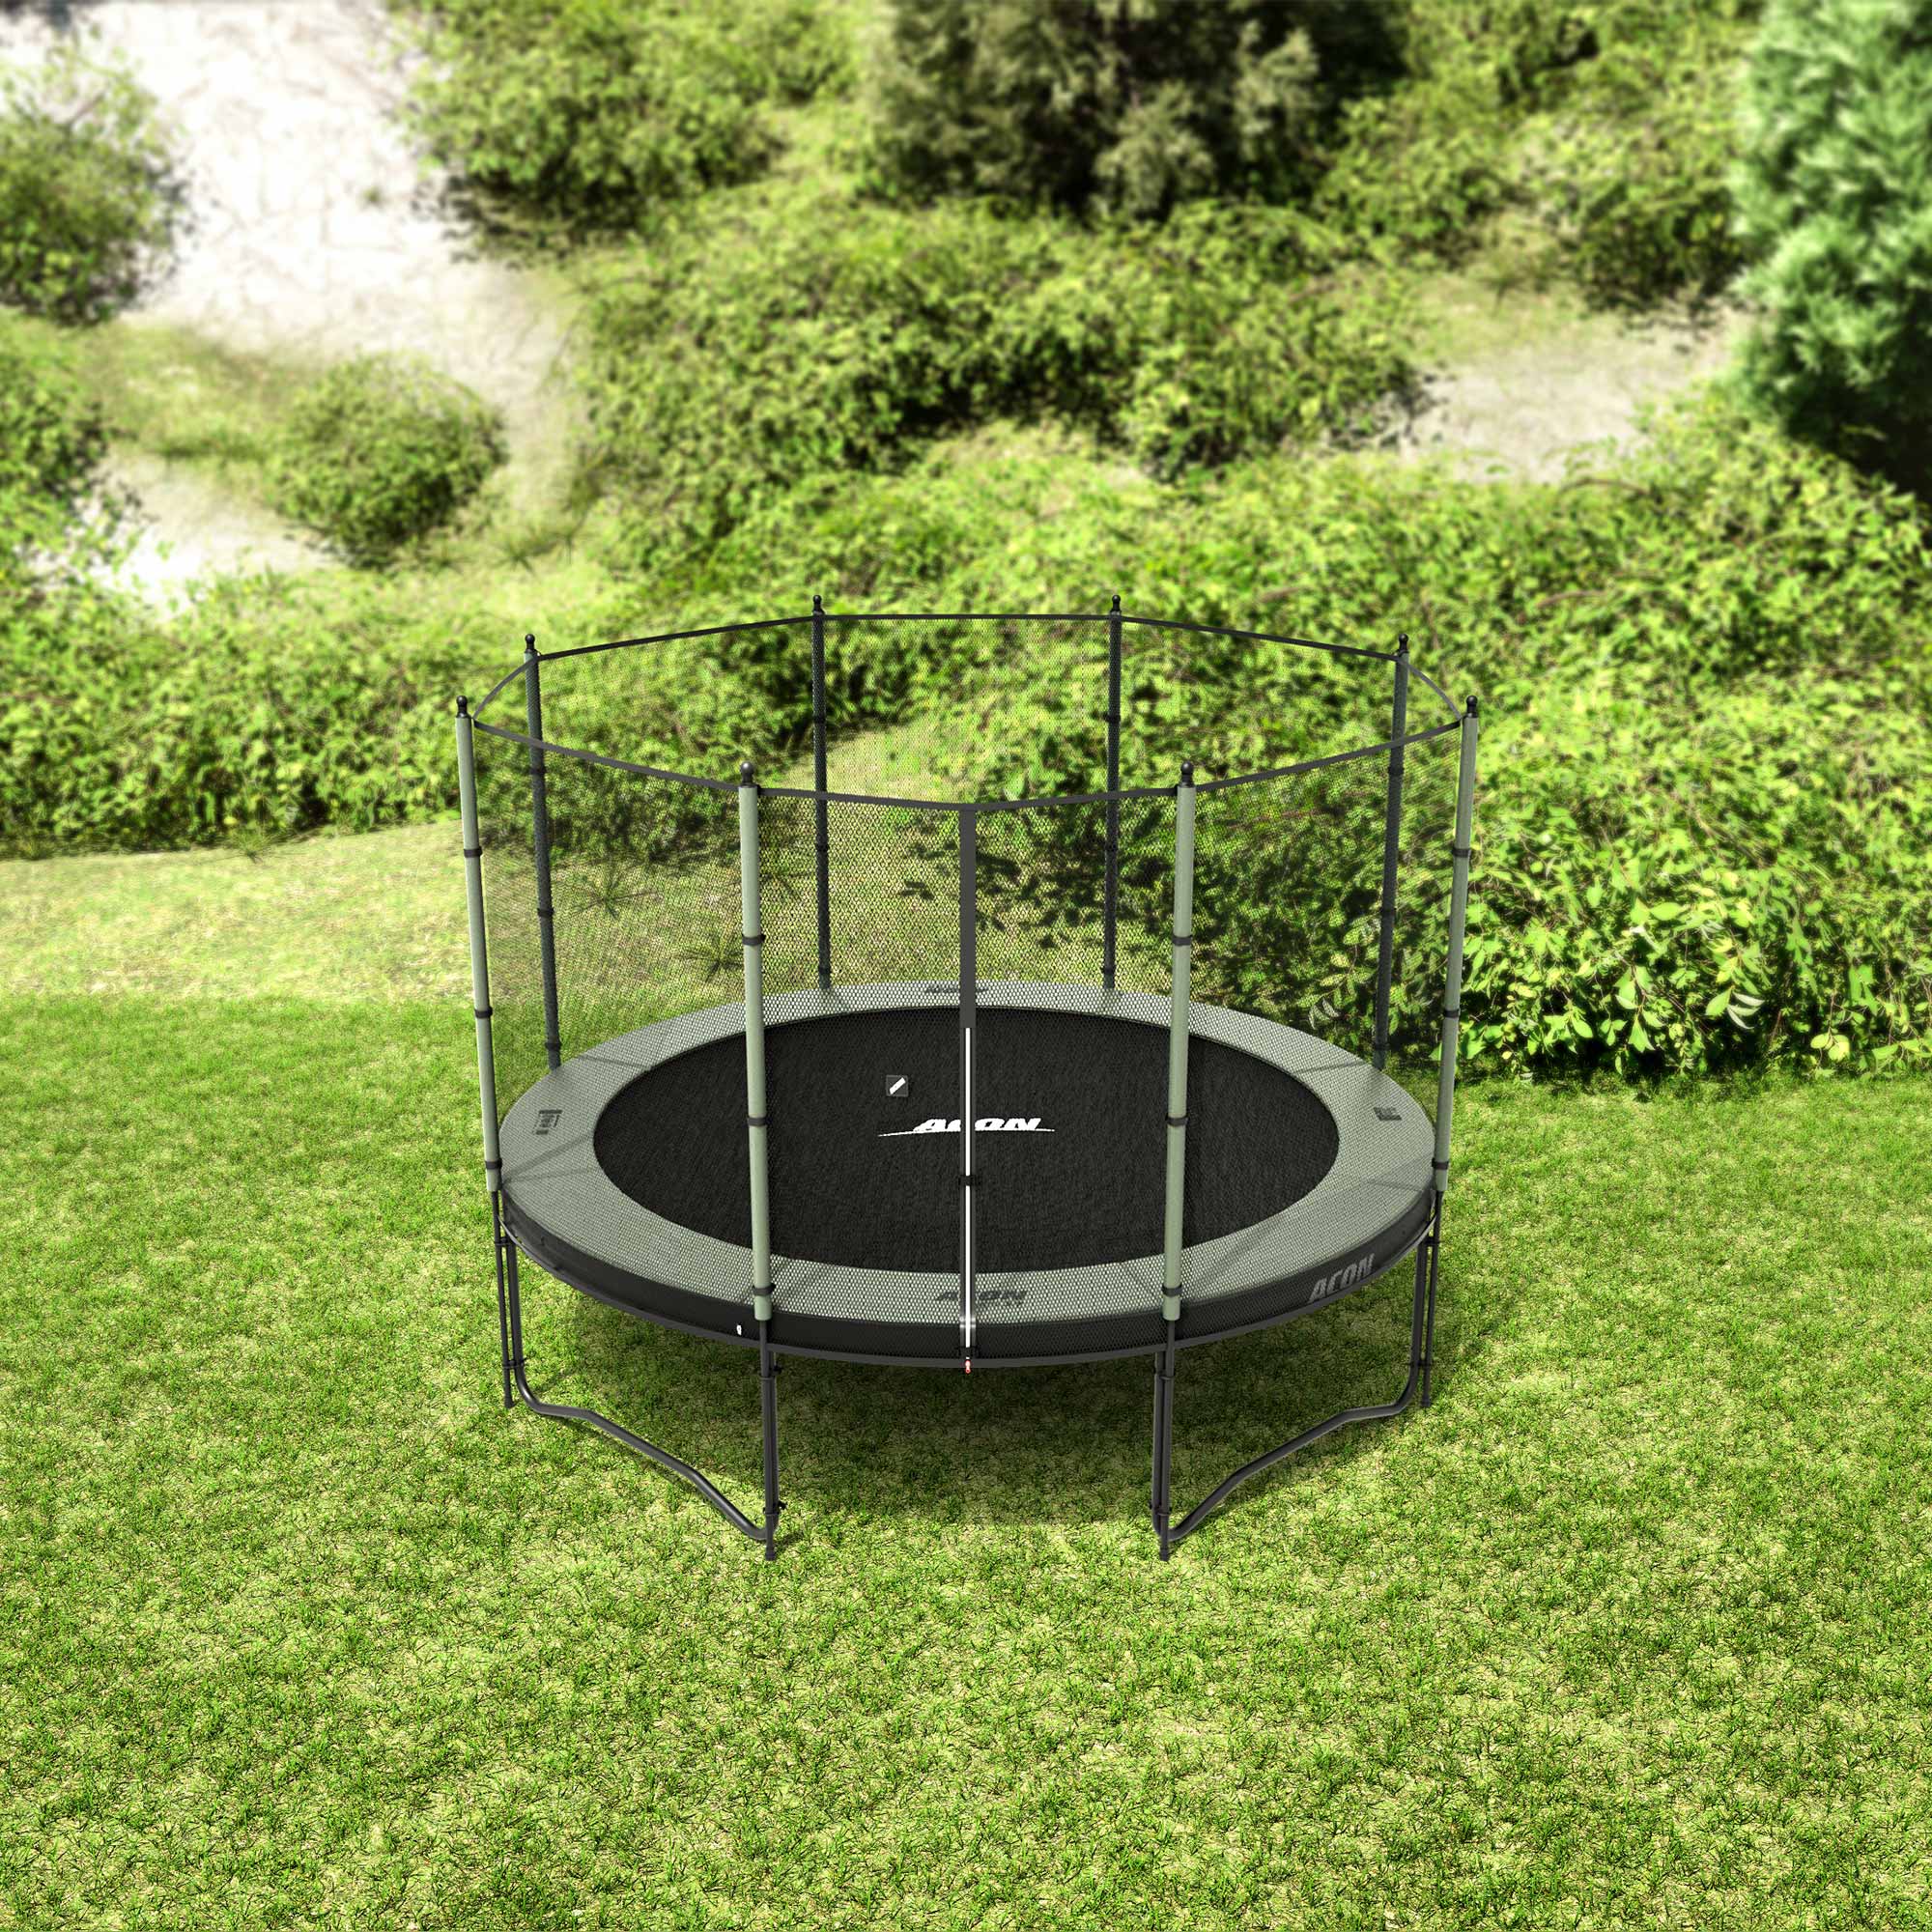 ACON Air 3,7m Trampoline with Standard Enclosure in the backyard.